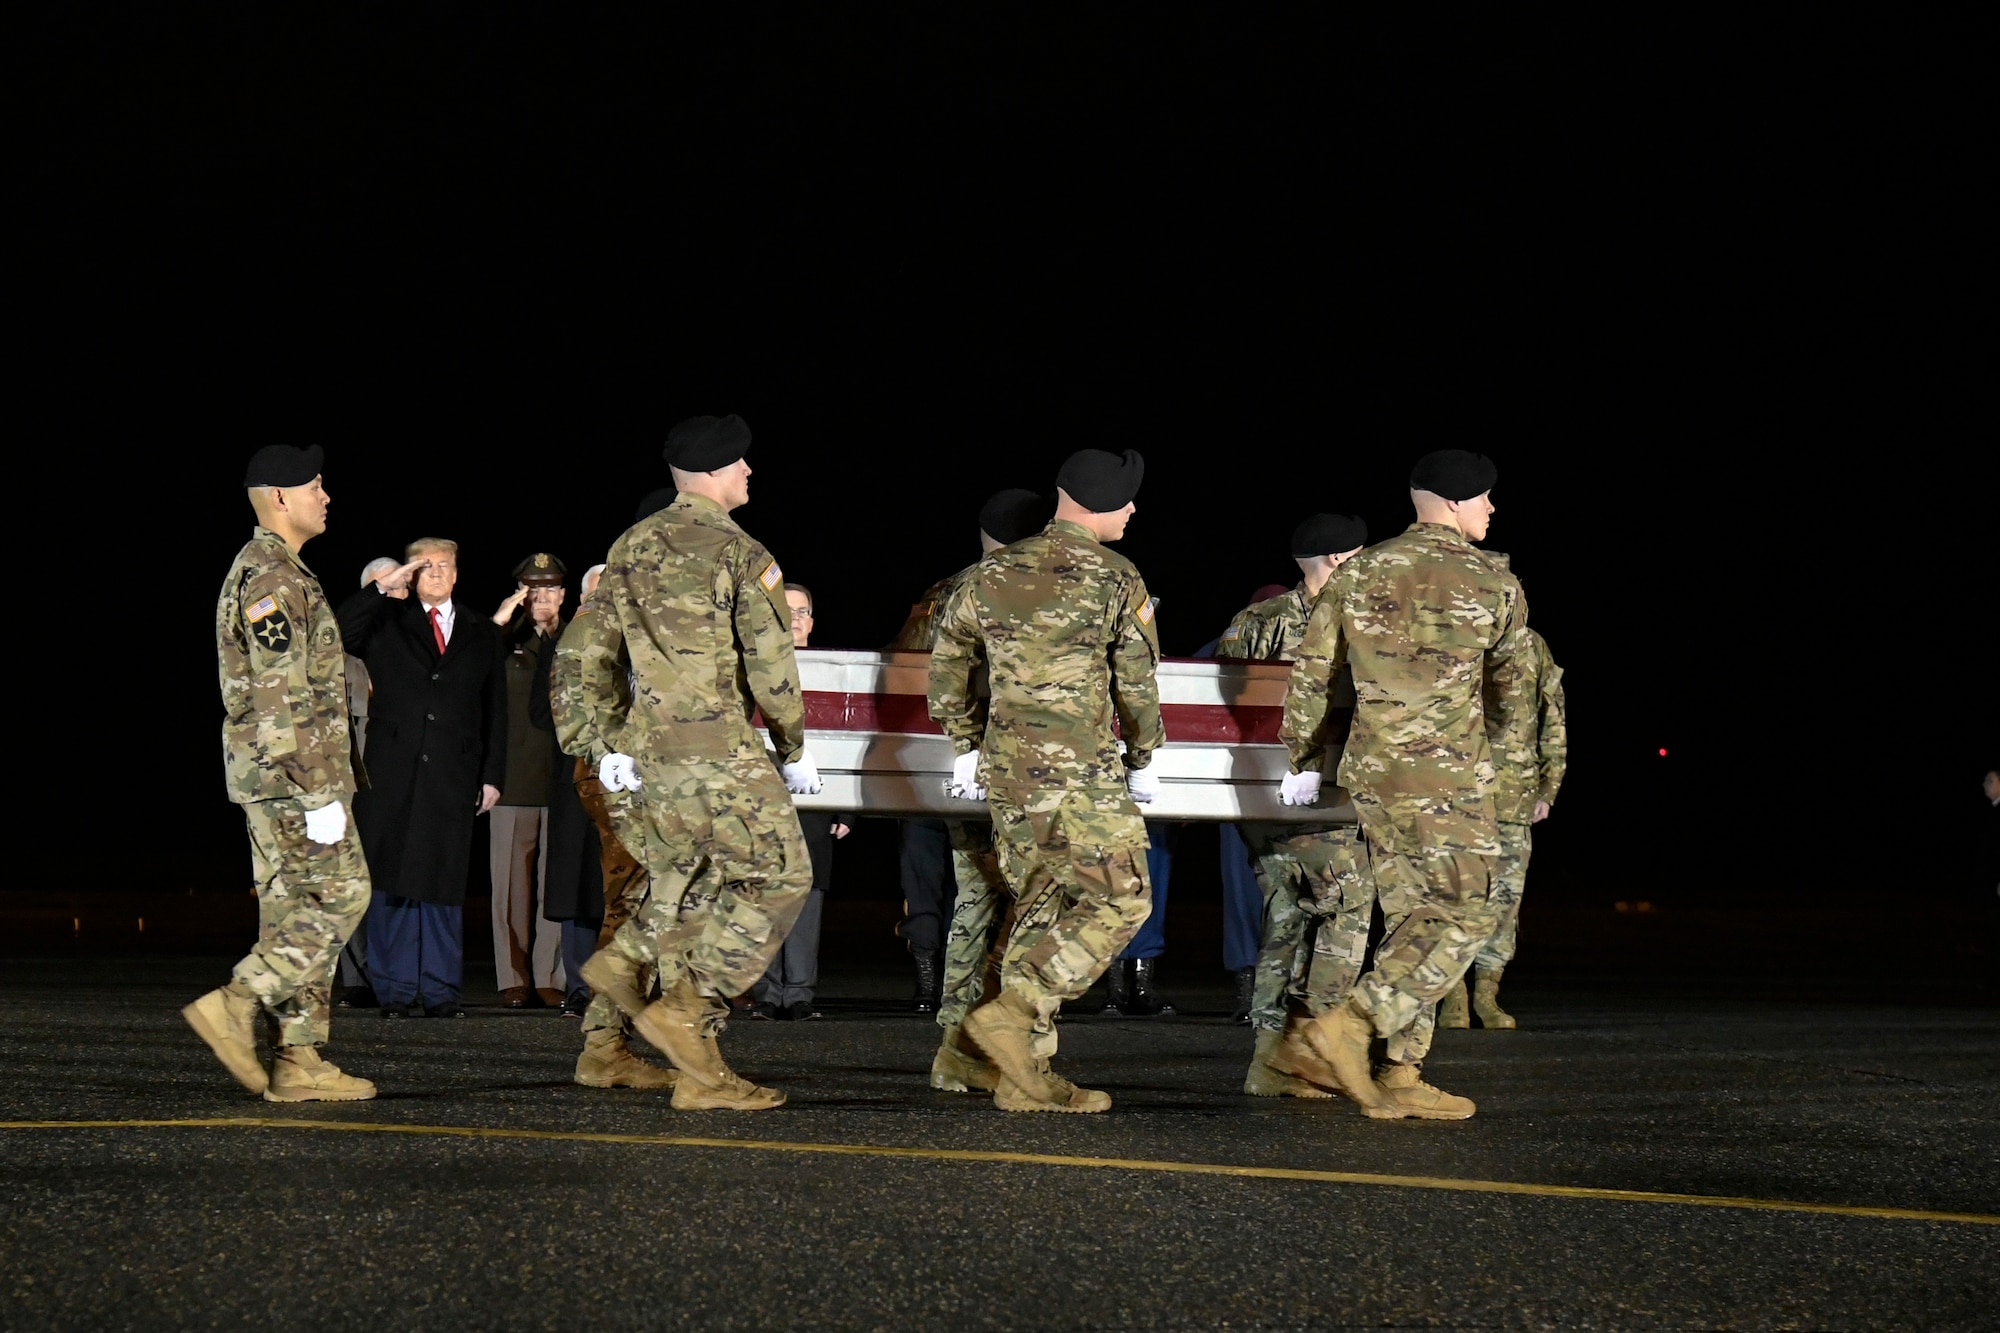 A U.S. Army carry team transfers the remains of Sgt. 1st Class Antonio R. Rodriguez, of Las Cruces, N.M., Feb. 10, 2020 at Dover Air Force Base, Del. Rodriguez was assigned to the 3rd Battalion, 7th Special Forces Group (Airborne), Eglin Air Force Base, Fla. (U.S. Air Force Photo by Senior Airman Eric M. Fisher)